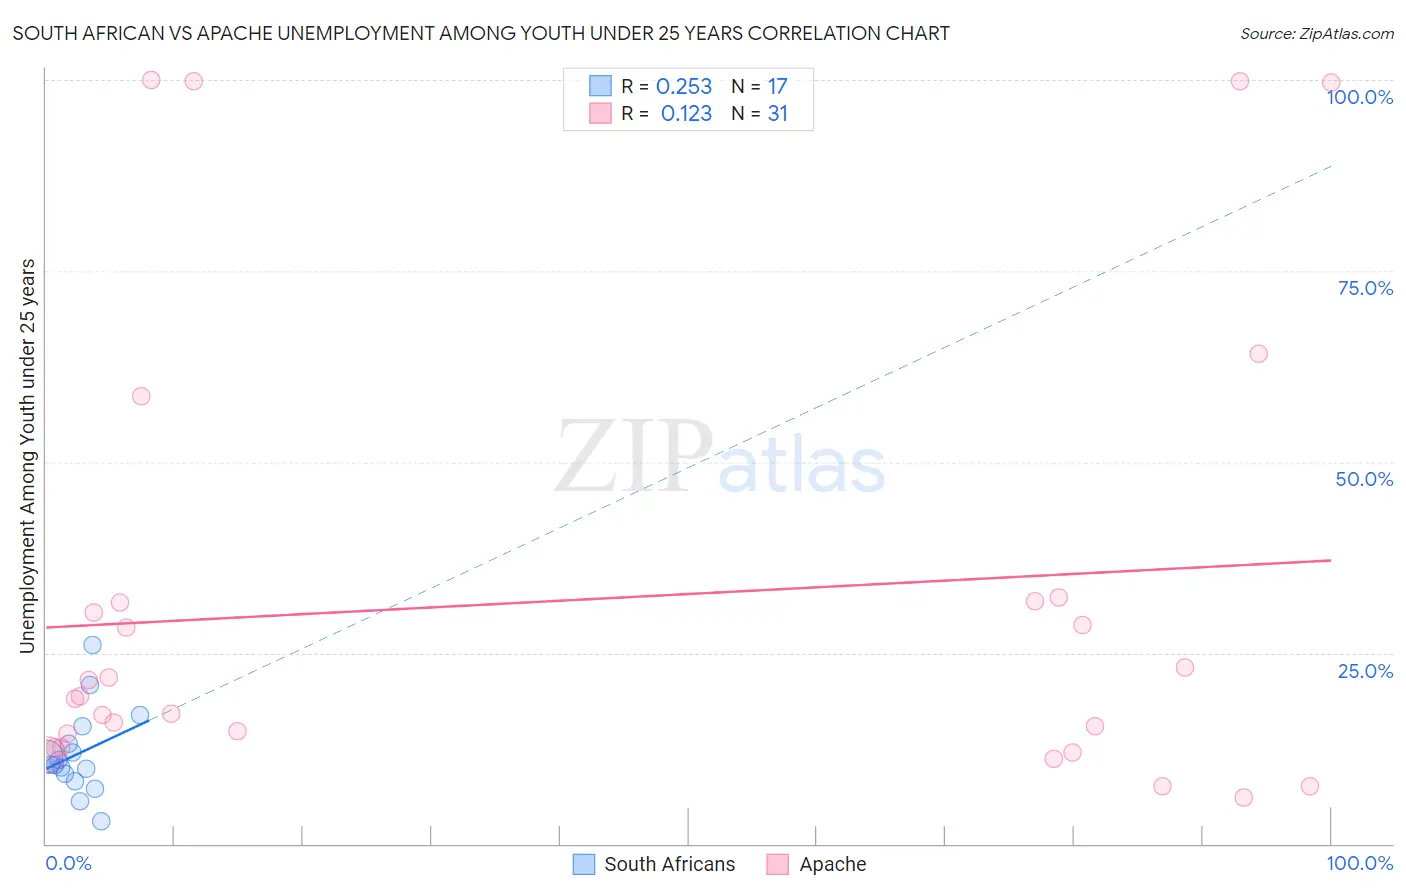 South African vs Apache Unemployment Among Youth under 25 years